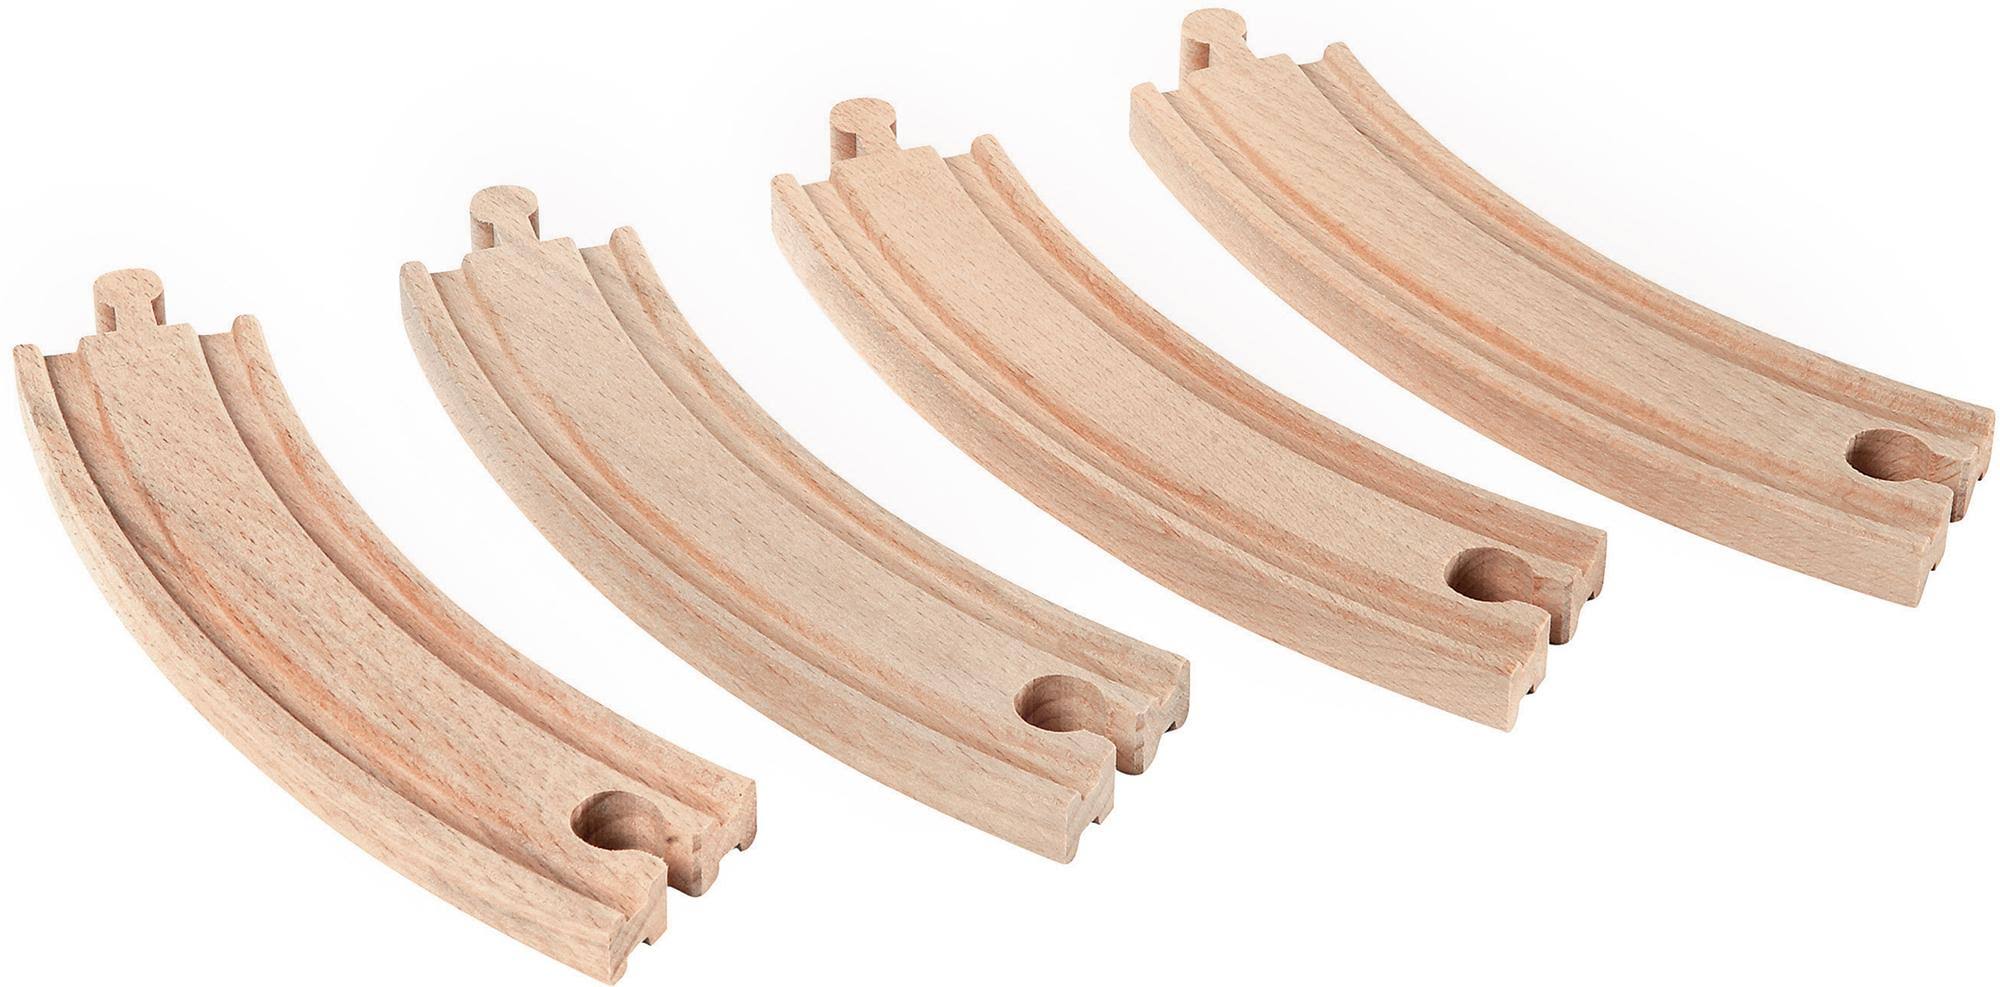 Brio Curved Tracks - Large, Wooden